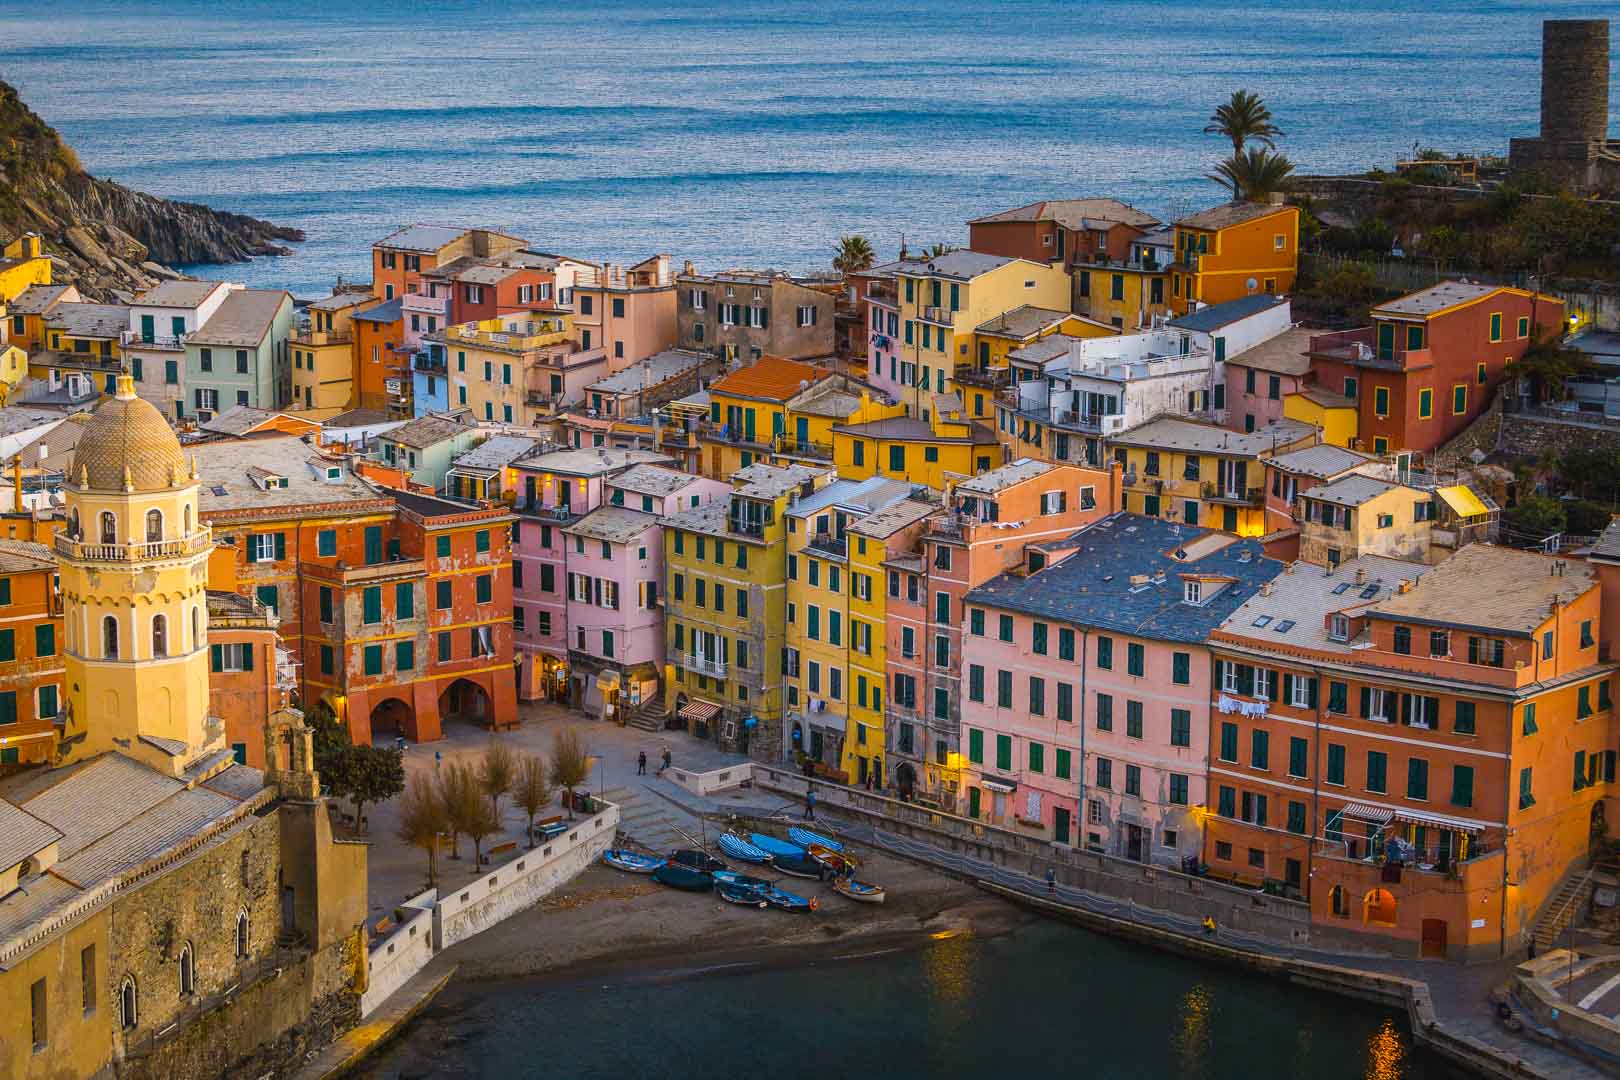 18 BEST Hotels in Vernazza Cinque Terre, Italy (+ full reviews)